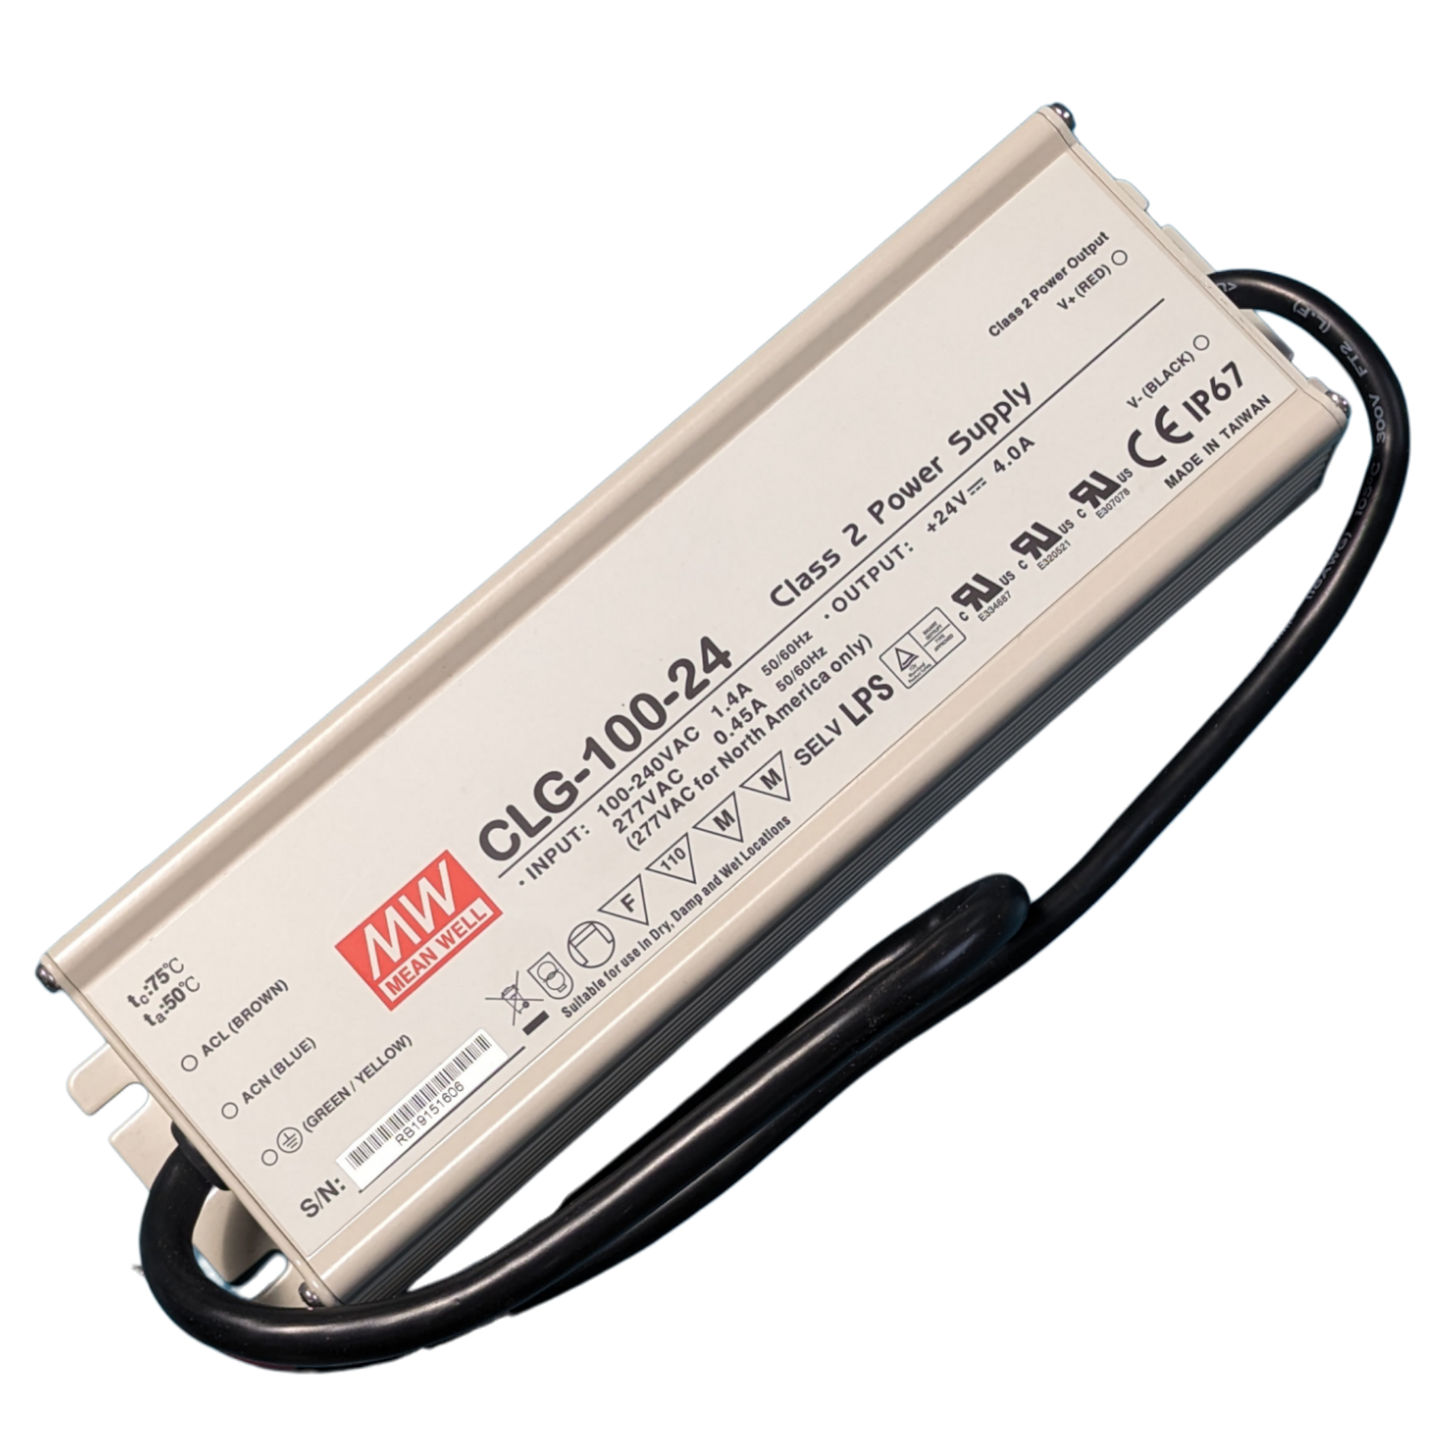 Meanwell CLG-100-24 LED Driver